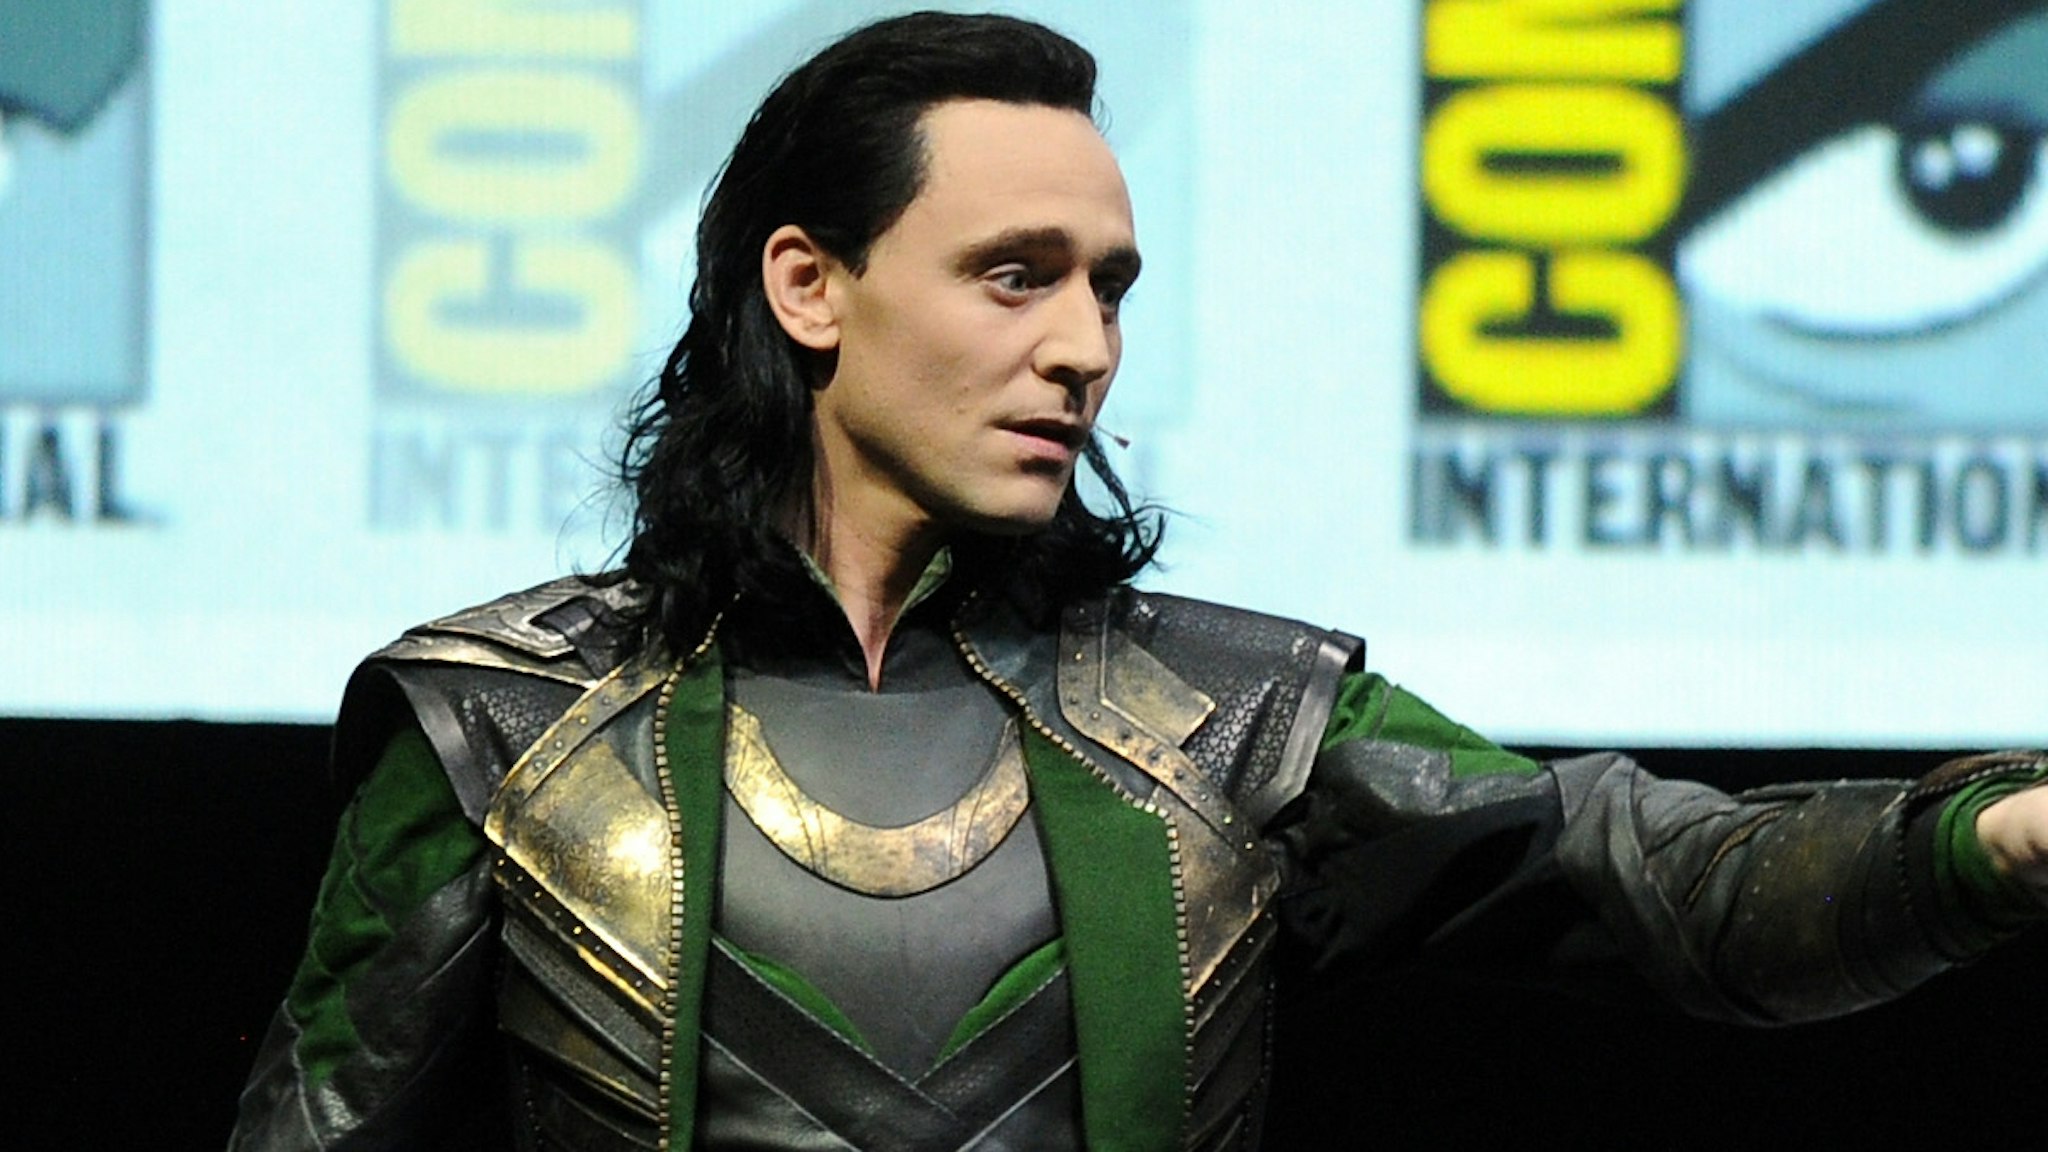 Actor Tom Hiddleston speaks onstage at Marvel Studios "Thor: The Dark World" and "Captain America: The Winter Soldier" during Comic-Con International 2013 at San Diego Convention Center on July 20, 2013 in San Diego, California.